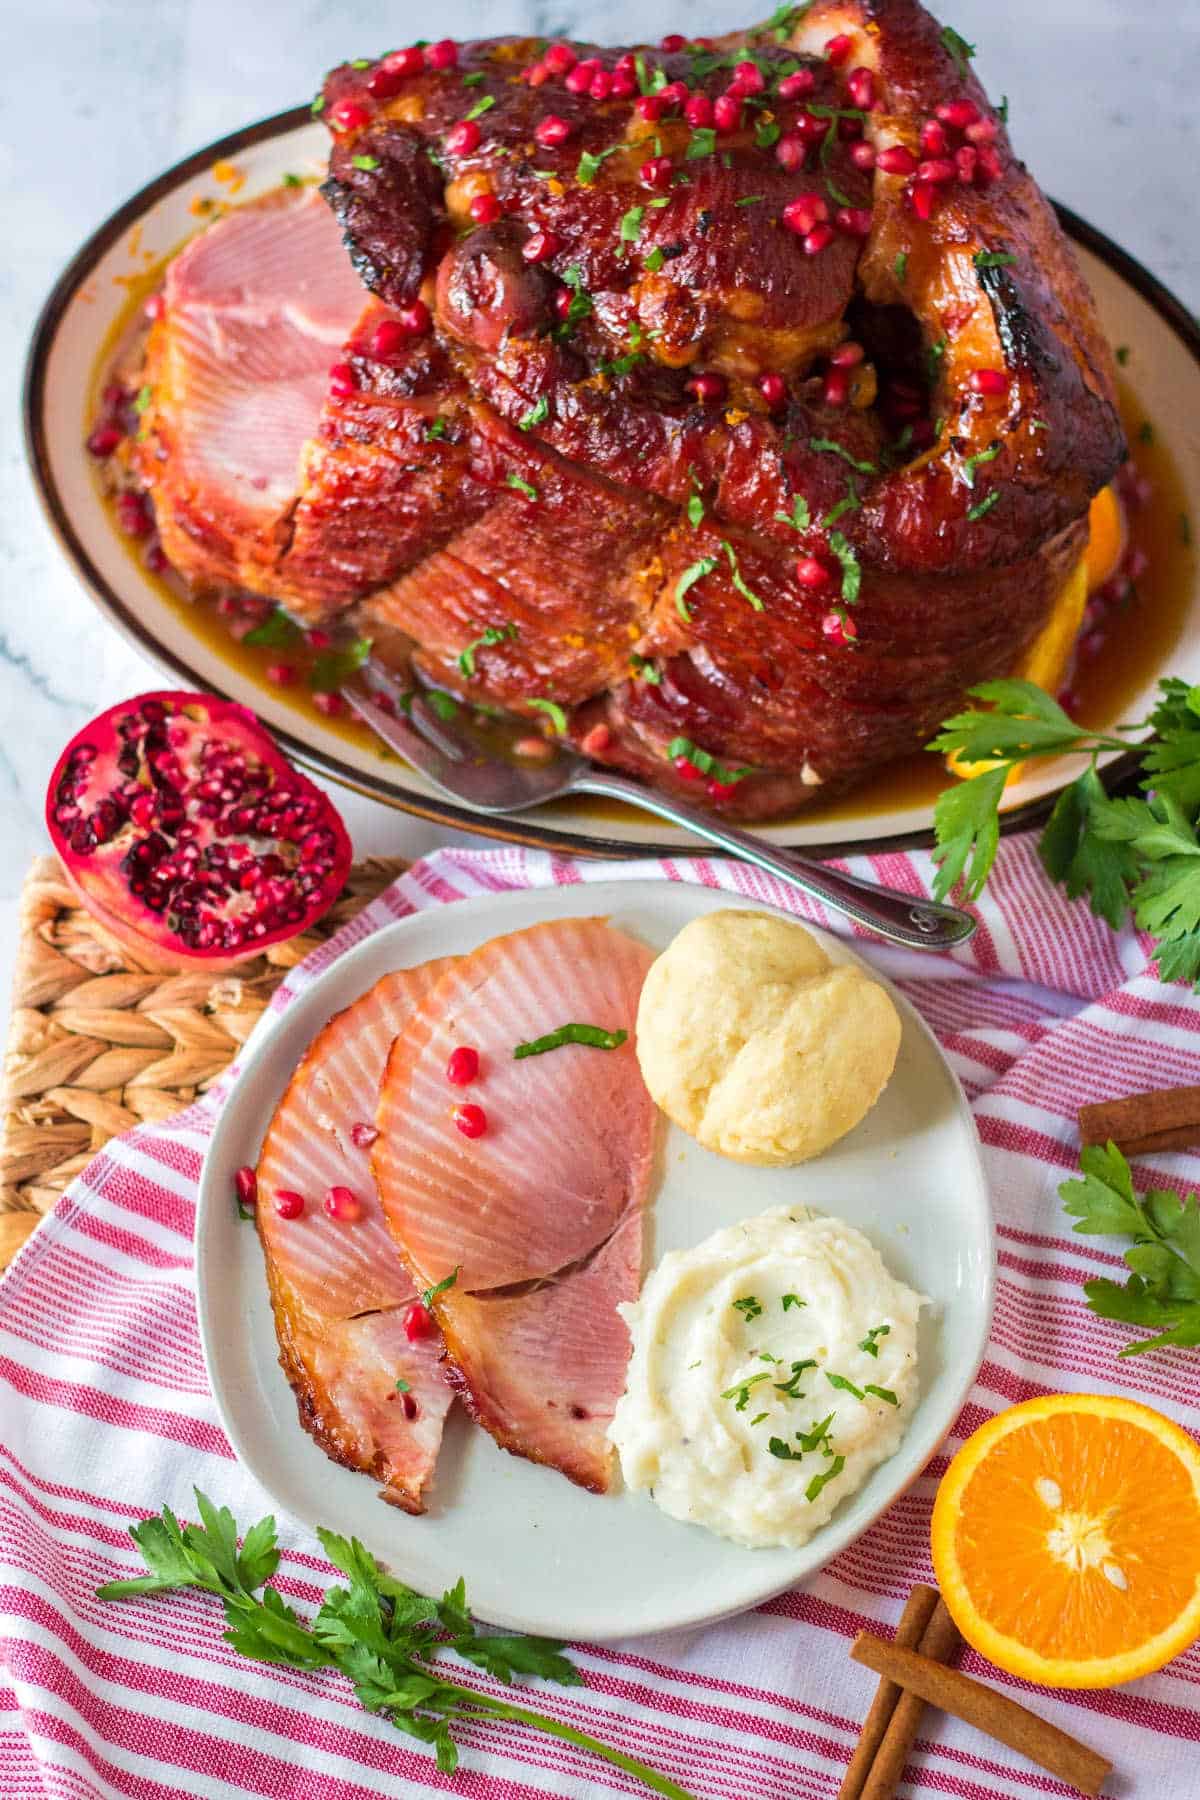 Christmas ham served with other sides and the whole ham in the background.